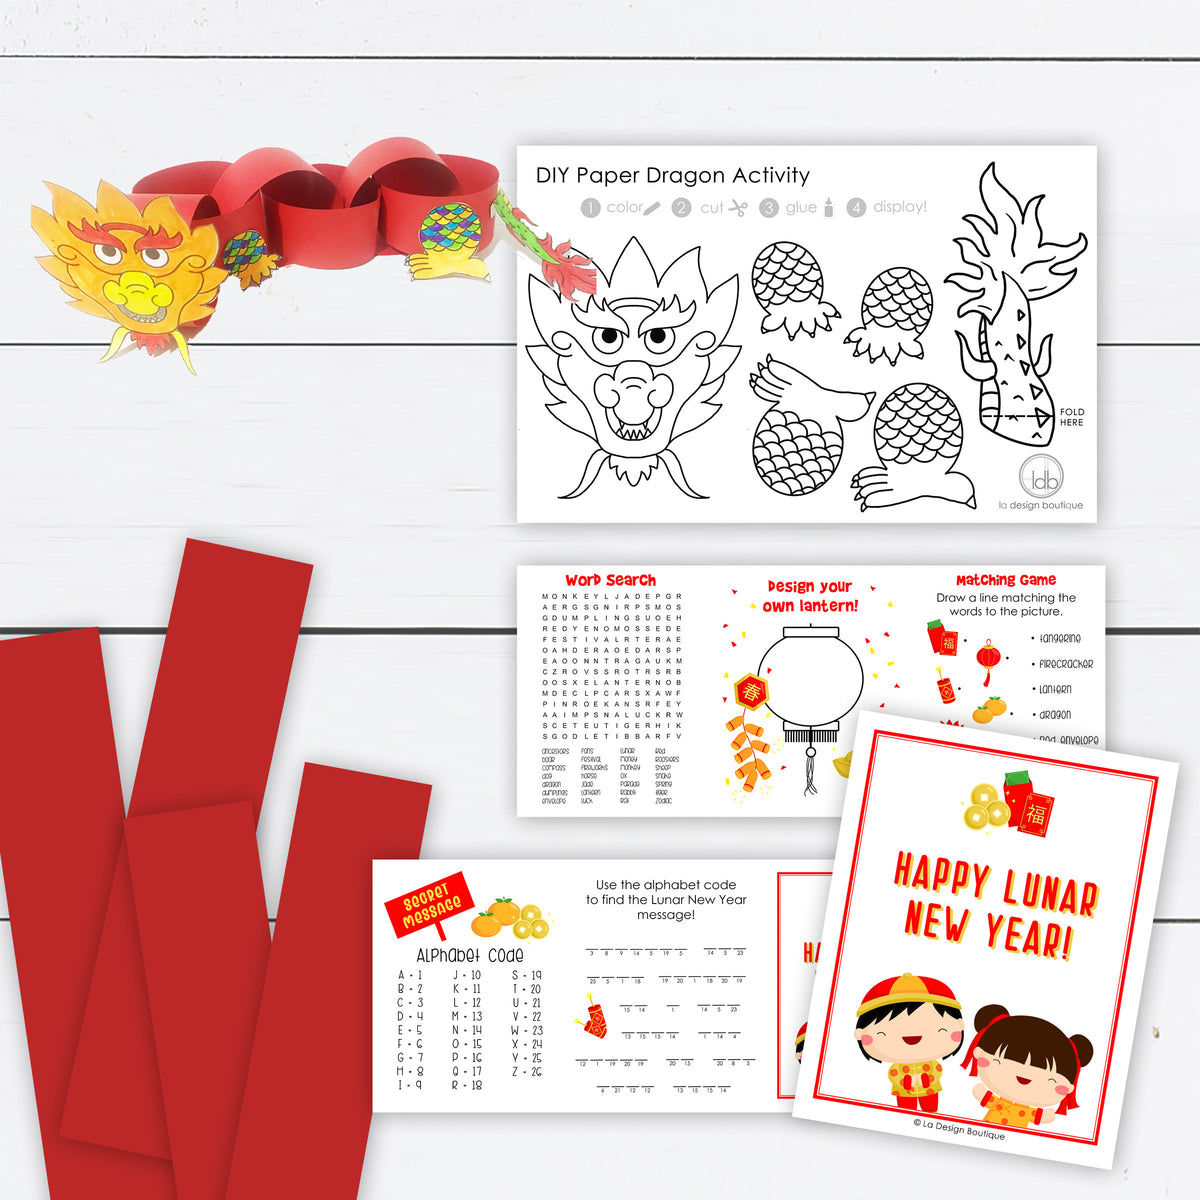 Lunar New Year Activity Sheets For Kids With Diy Paper Dragon La Design Boutique